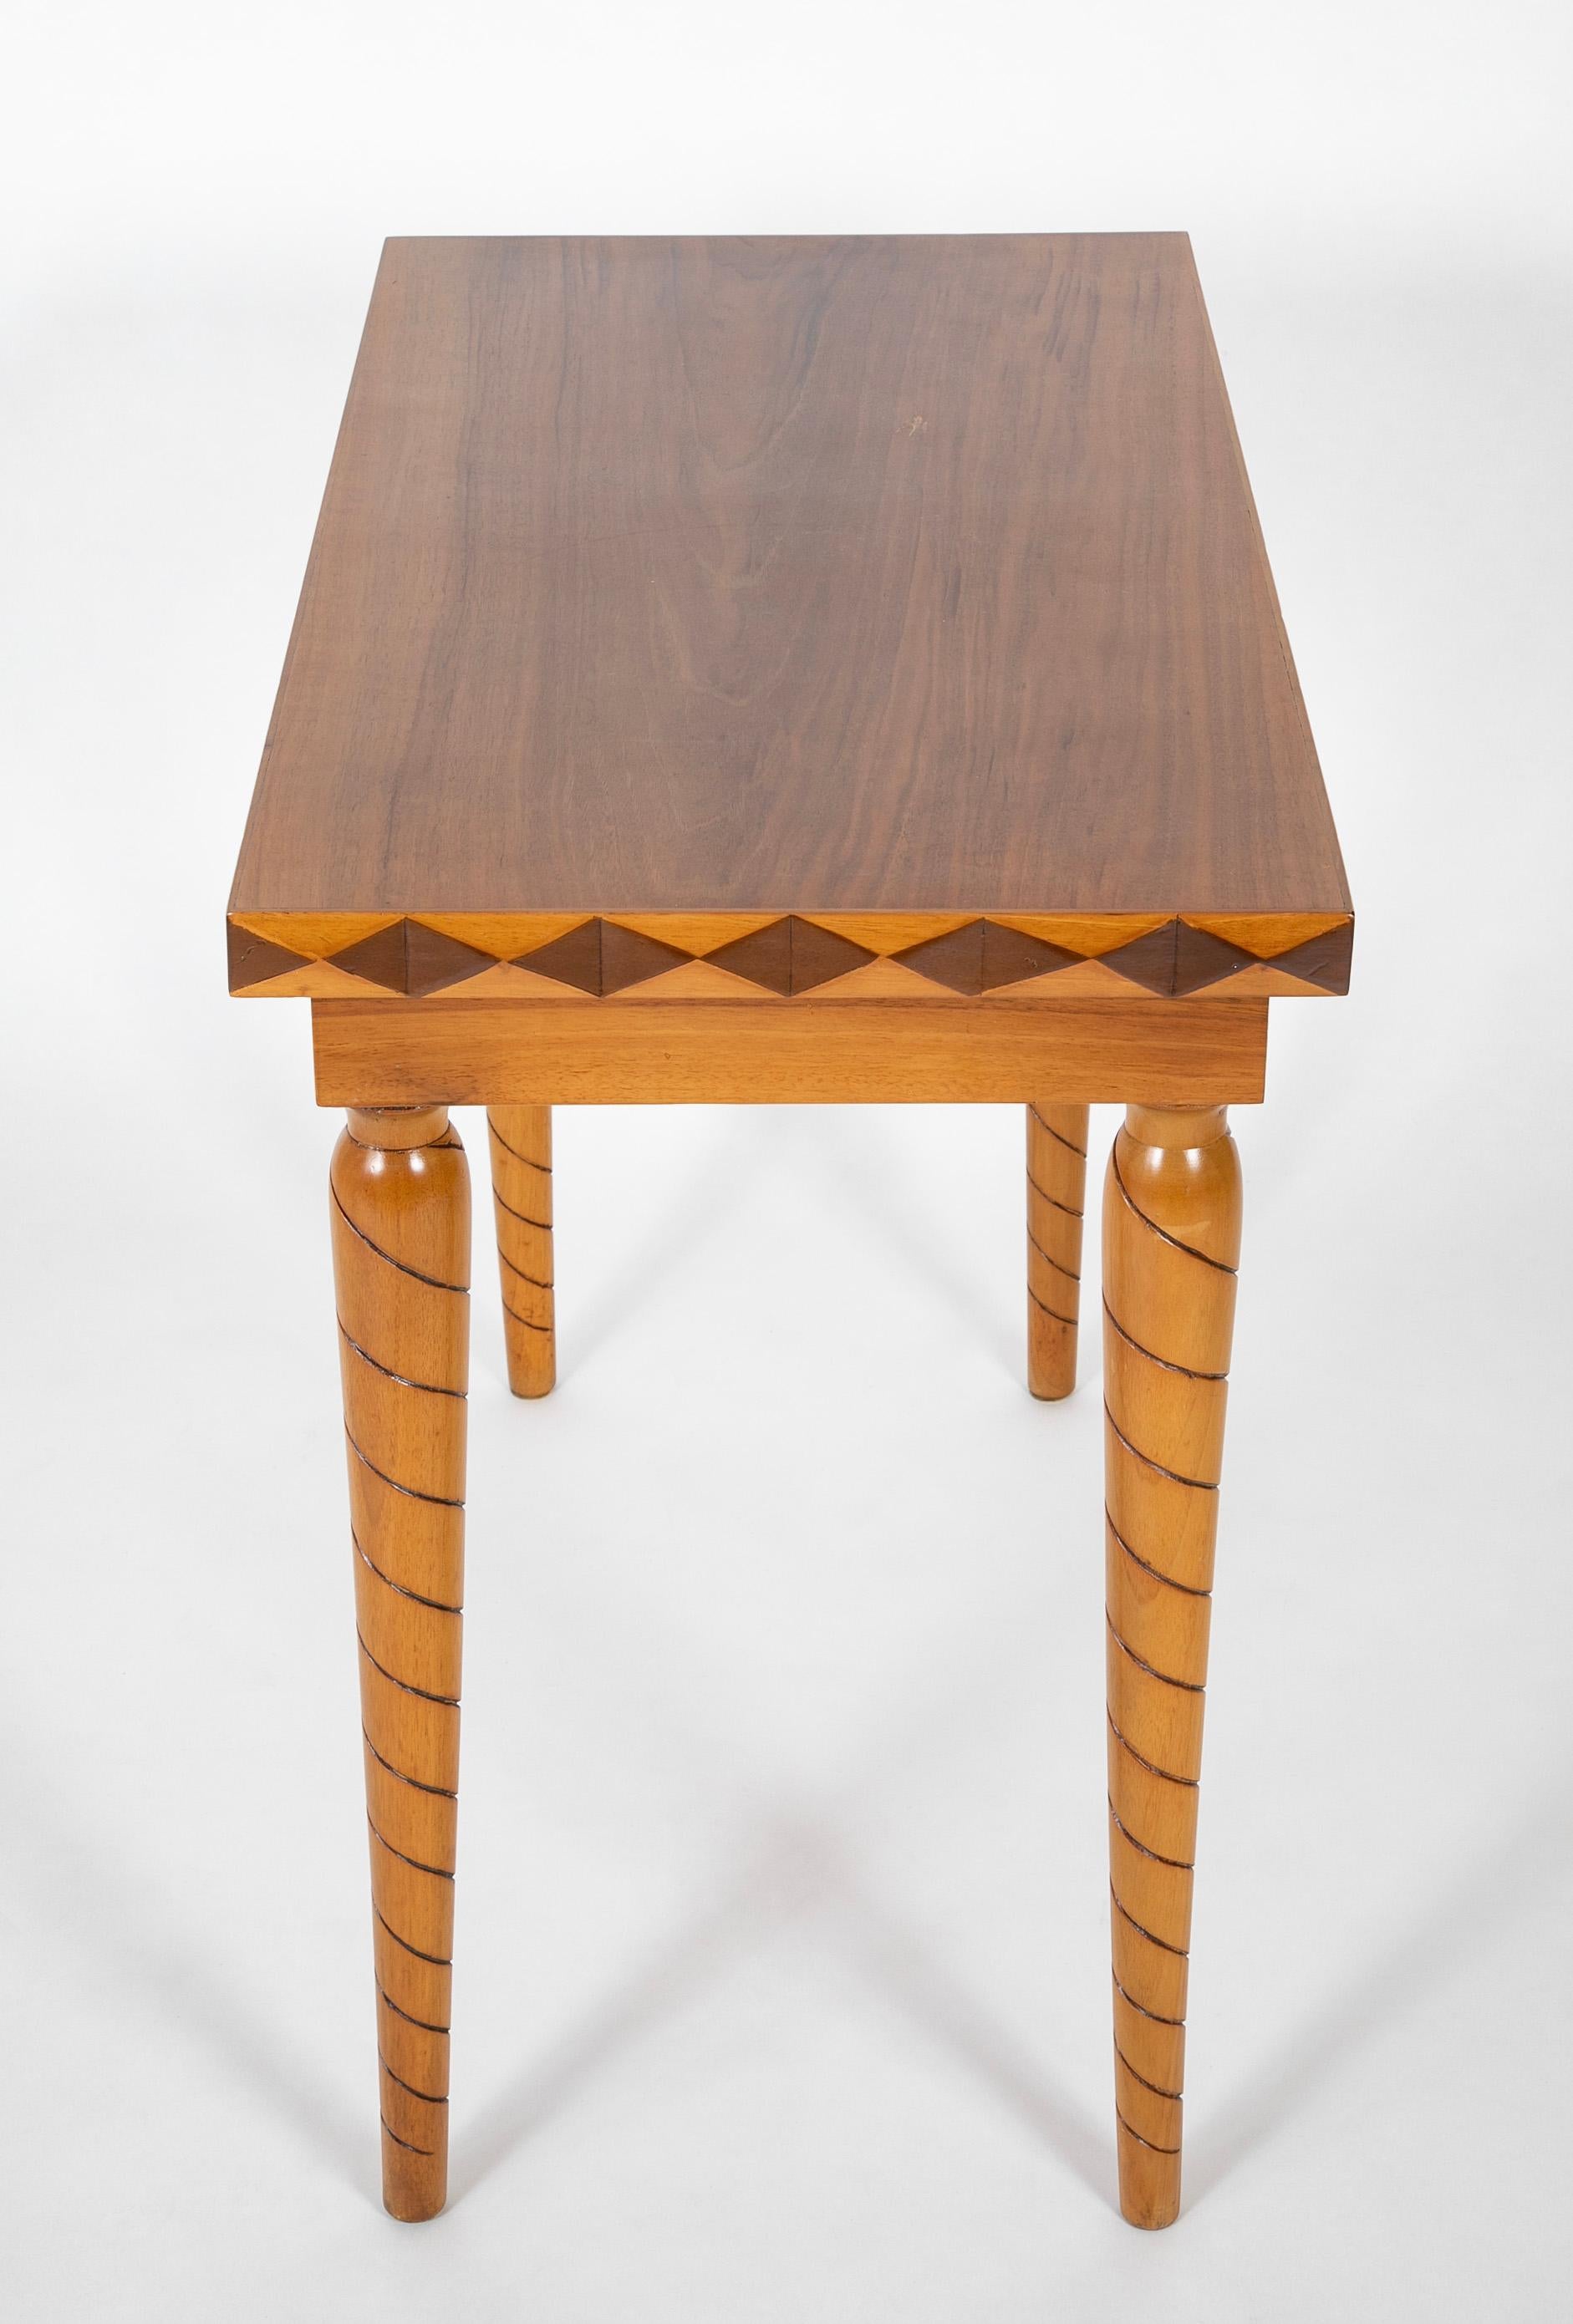 20th Century Mid-Century Italian 2 Drawer Wooden Table with Worked Wood Design on Edge & Legs For Sale